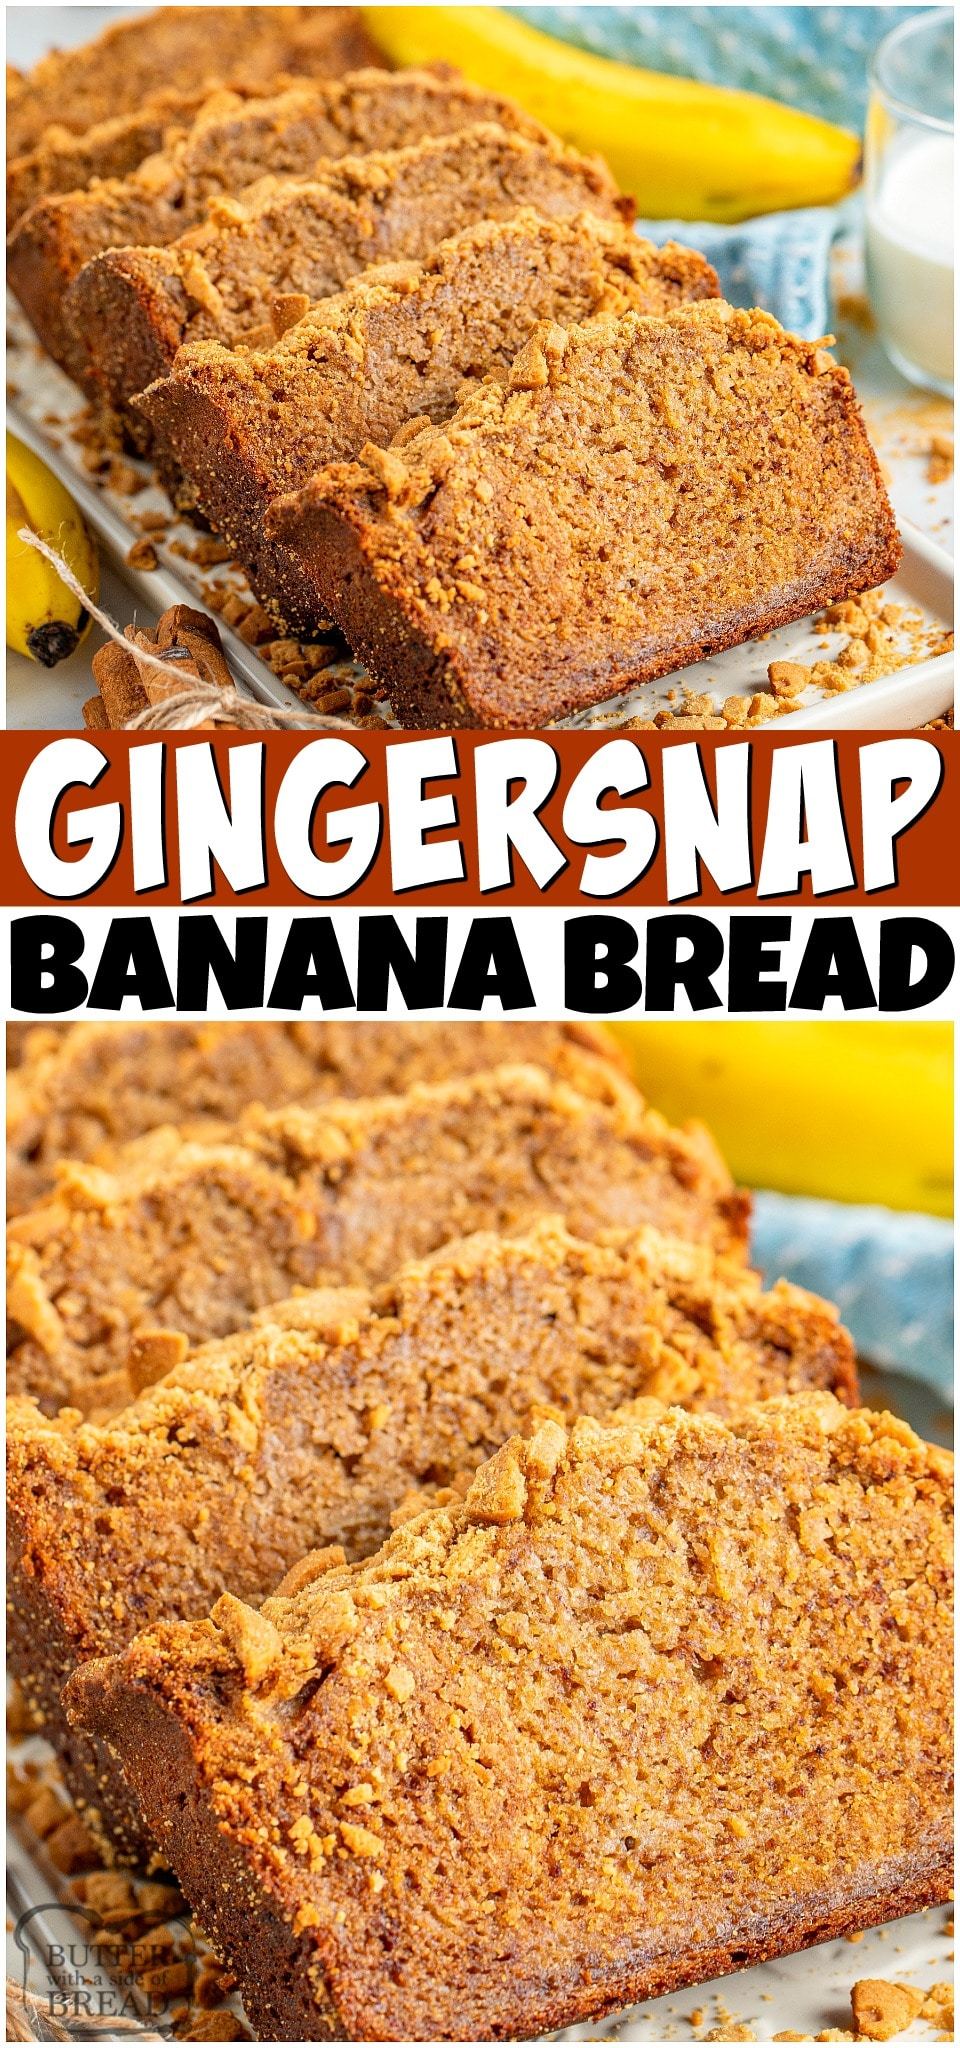 Gingersnap Banana Bread is a spiced banana bread recipe topped with crushed gingersnap cookies! The flavors meld into perfection in this incredible banana quick bread. #banana #bananabread #bread #quickbread #Gingersnap #easyrecipe from BUTTER WITH A SIDE OF BREAD